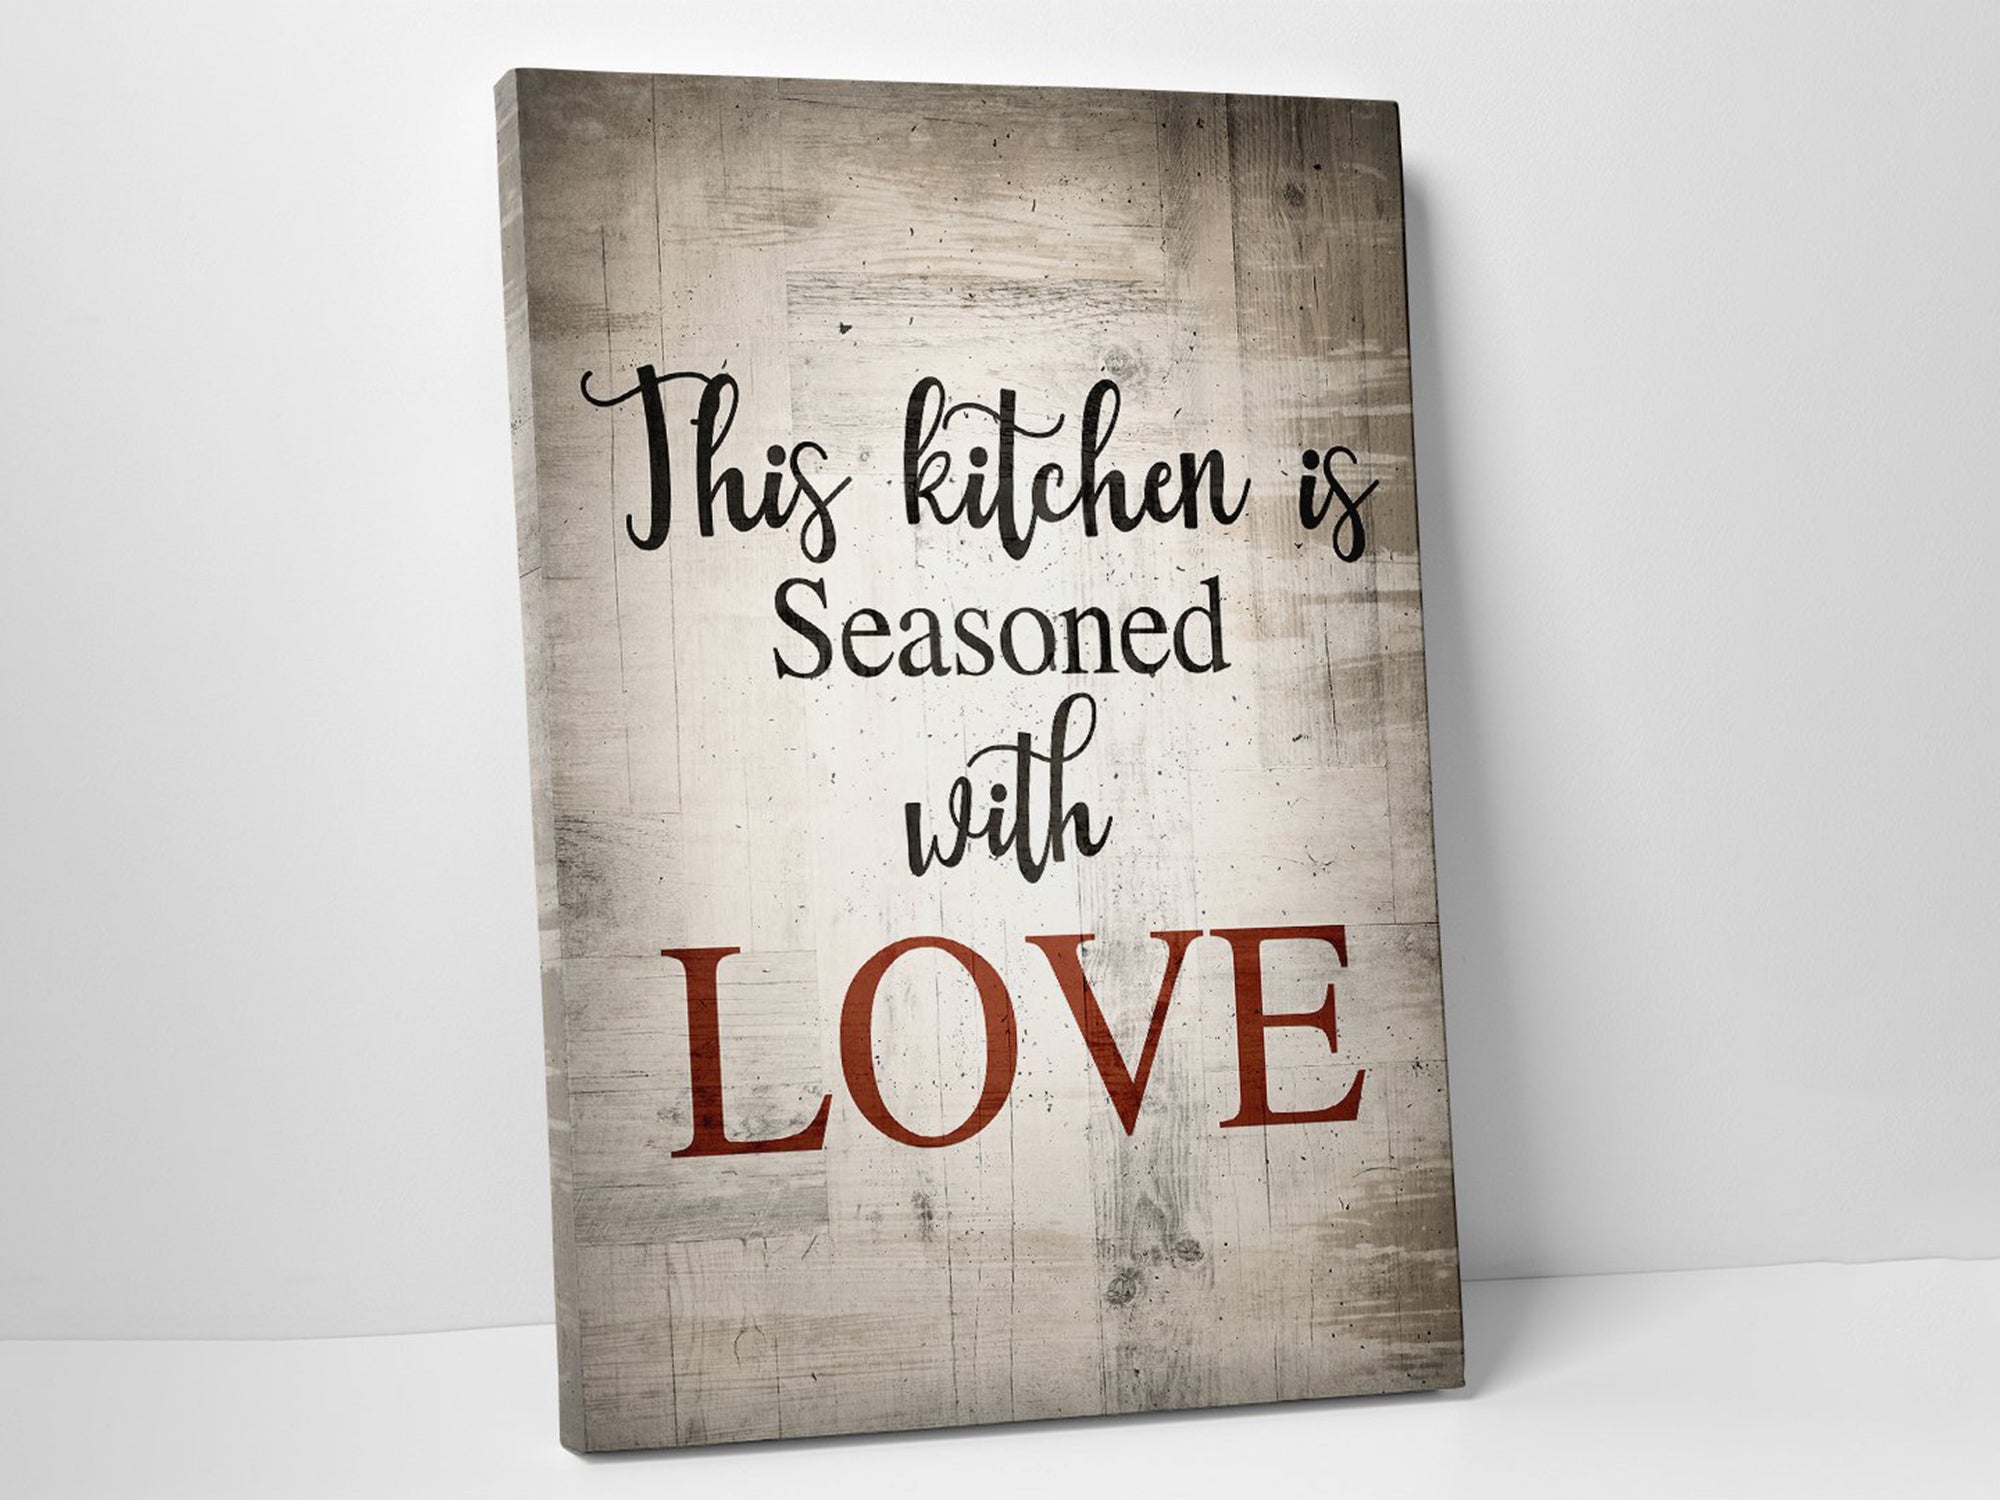 Kitchen Is Love - Christian - Dinning Room Canvas Wall Art